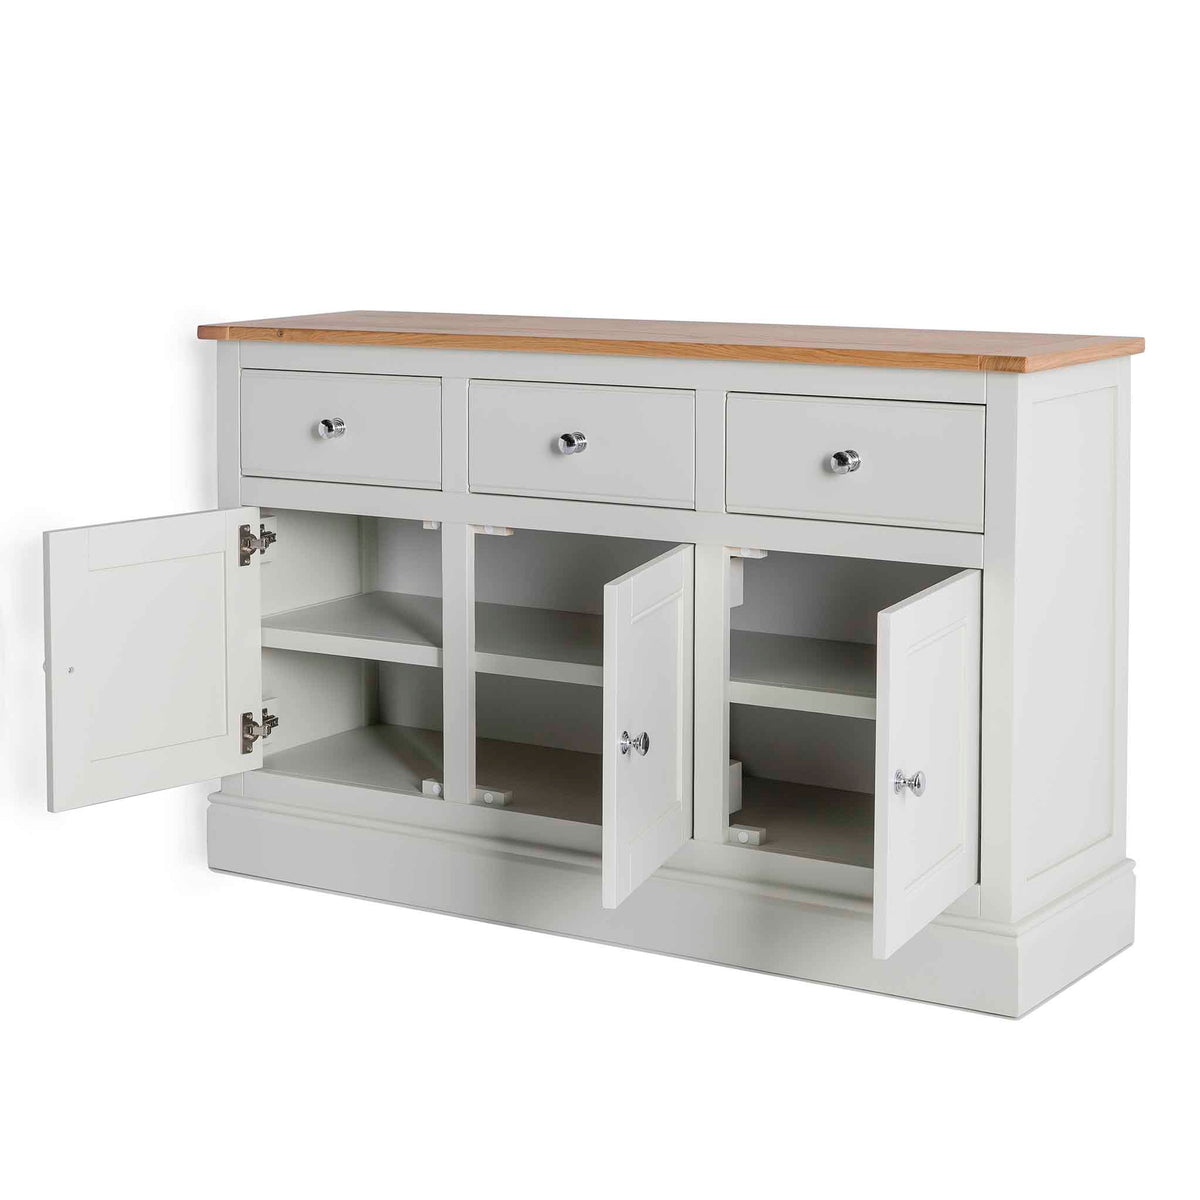 Chichester Ivory Large Sideboard - Side view with doors open